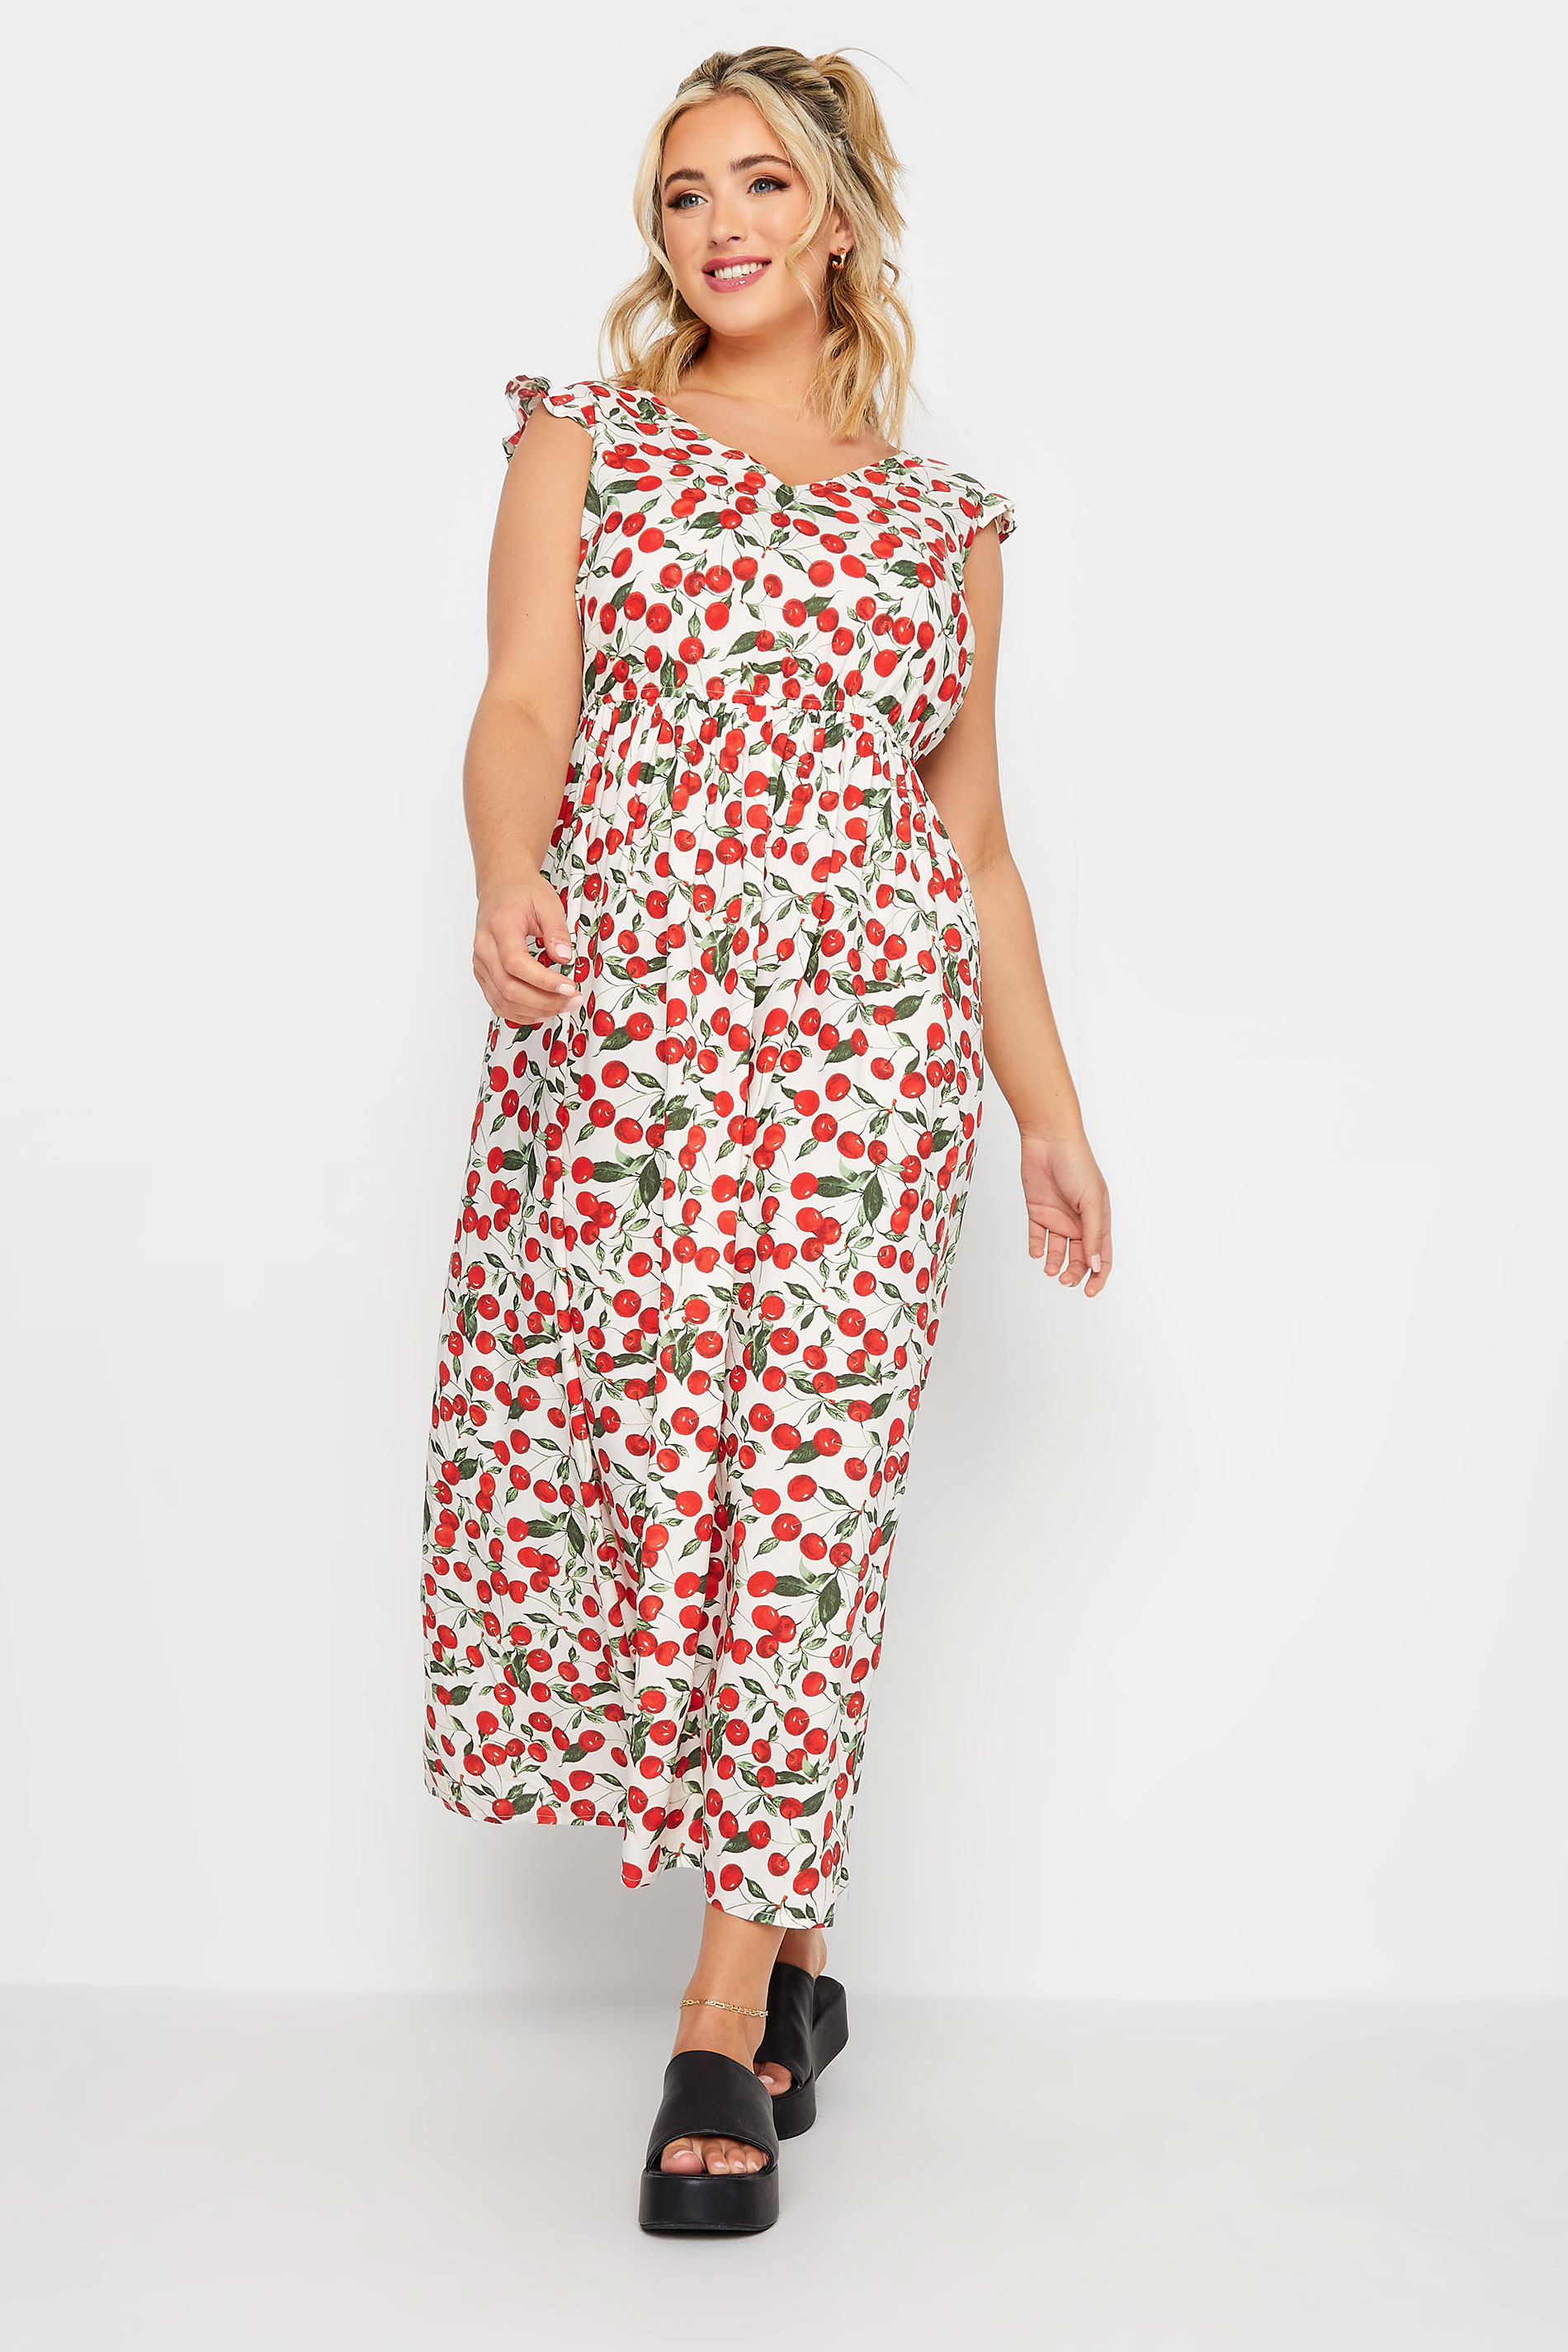 LIMITED COLLECTION Plus Size White Cherry Print Frill Maxi Dress | Yours Clothing 2